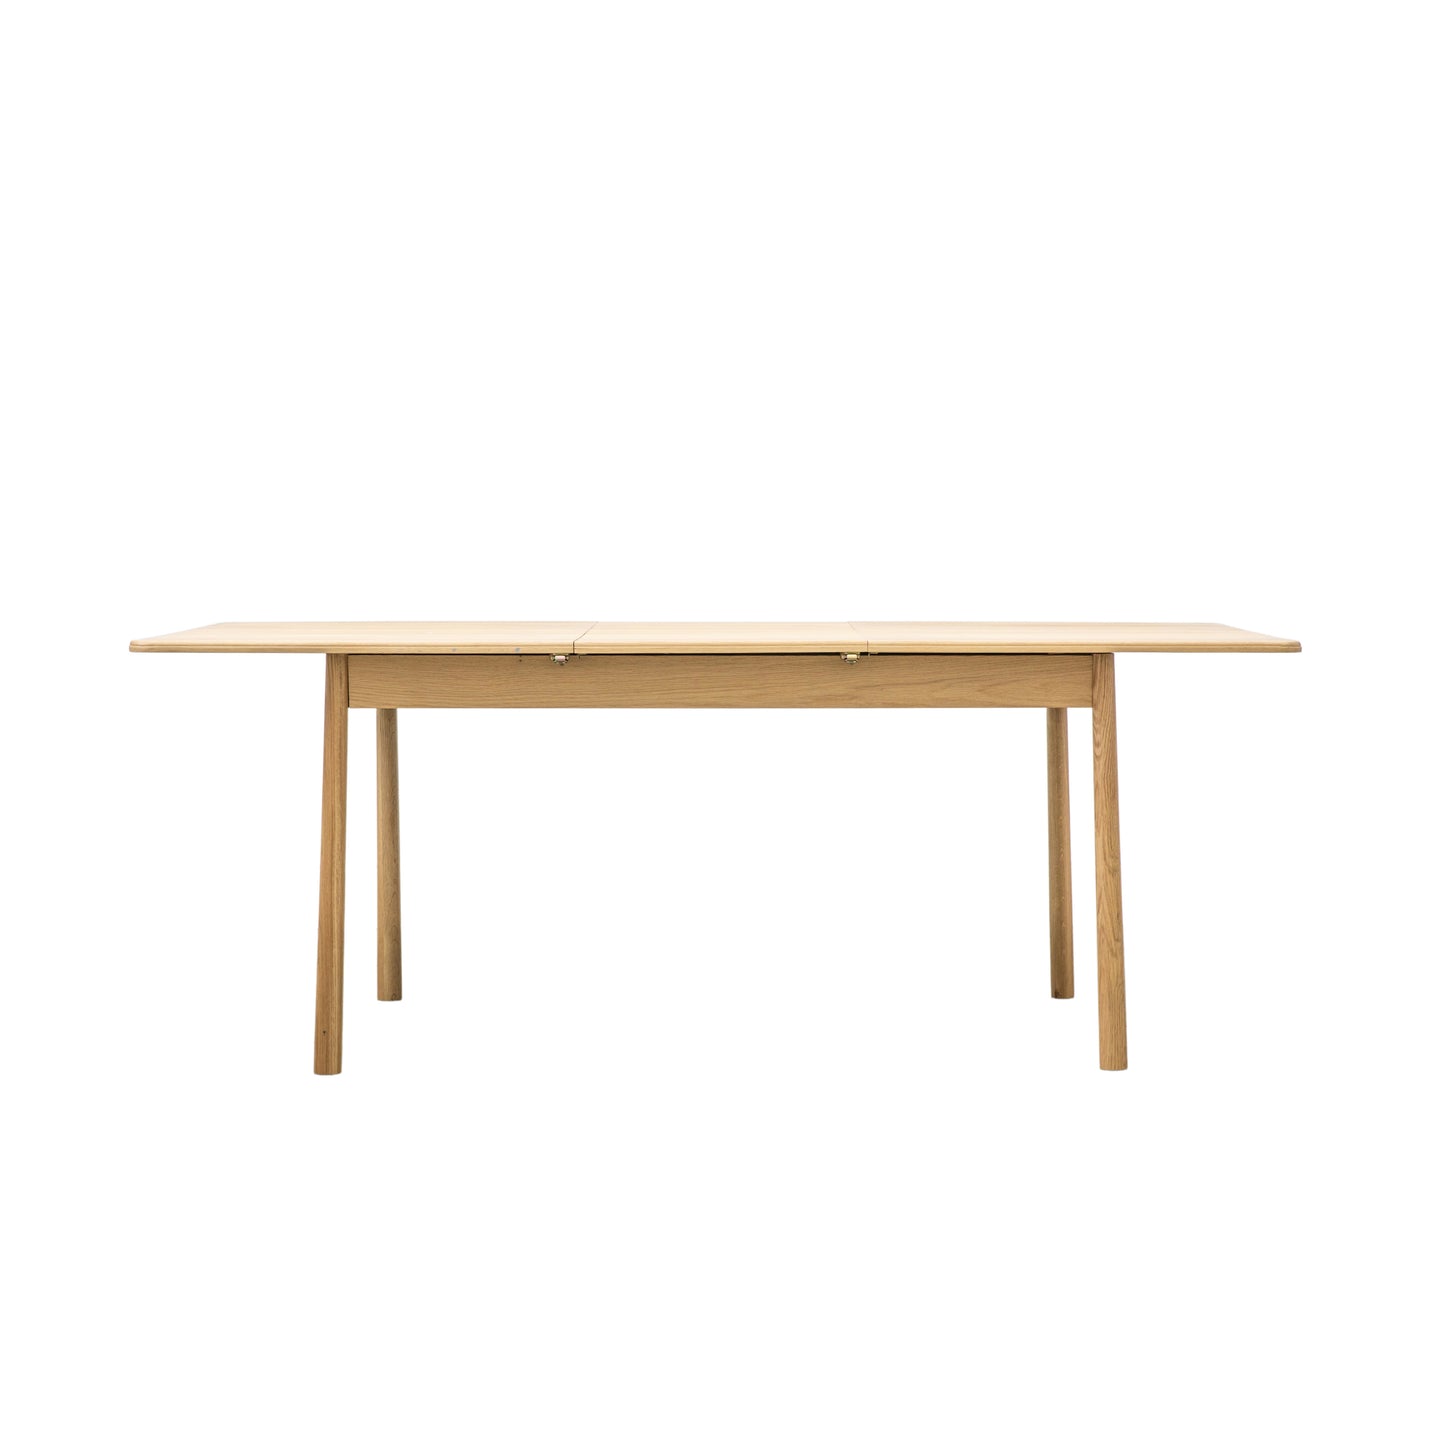 Kikiathome.co.uk offers a Tigley Extendable Dining Table with a wooden top and legs, perfect for interior decor and home furniture.